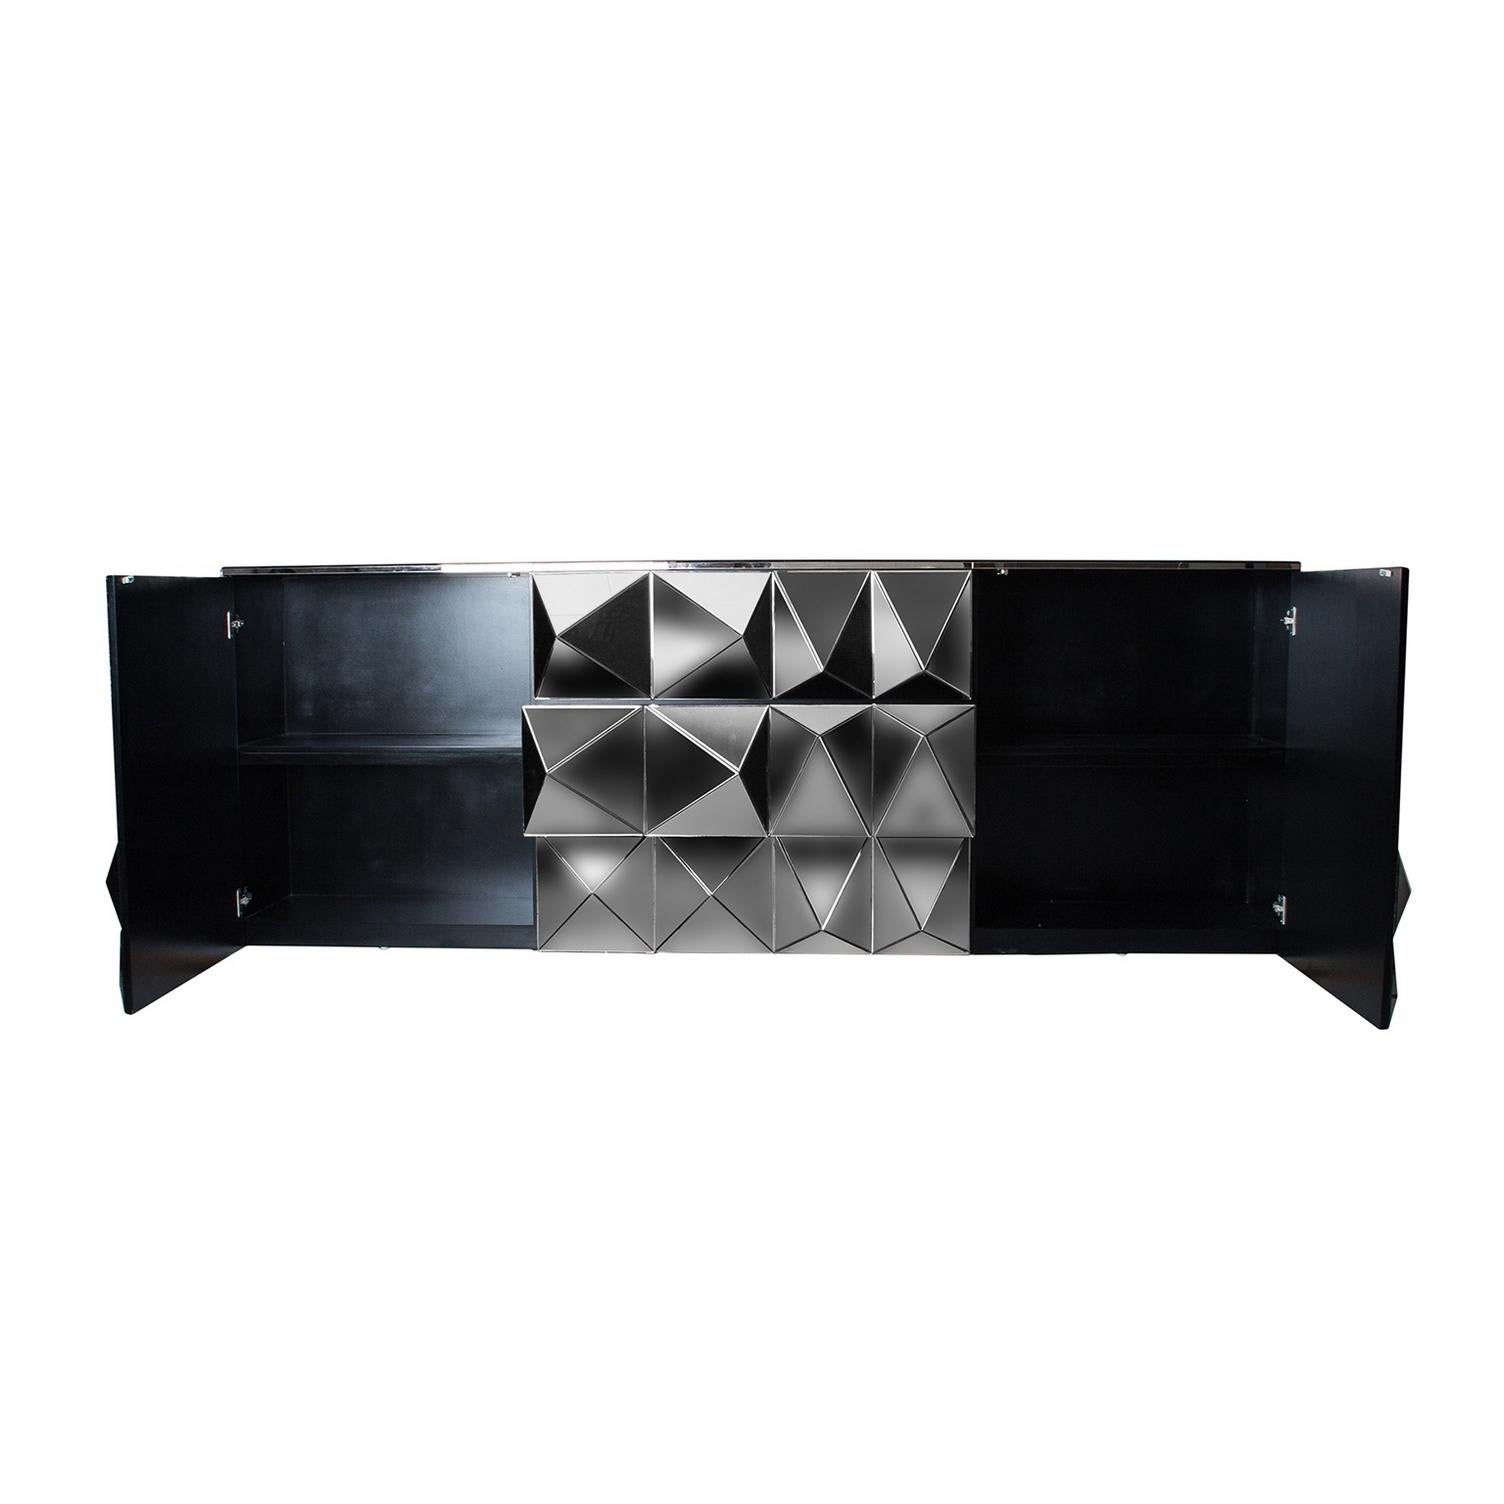 European Brutalist Style And Bevelled Mirrored Design Sideboard